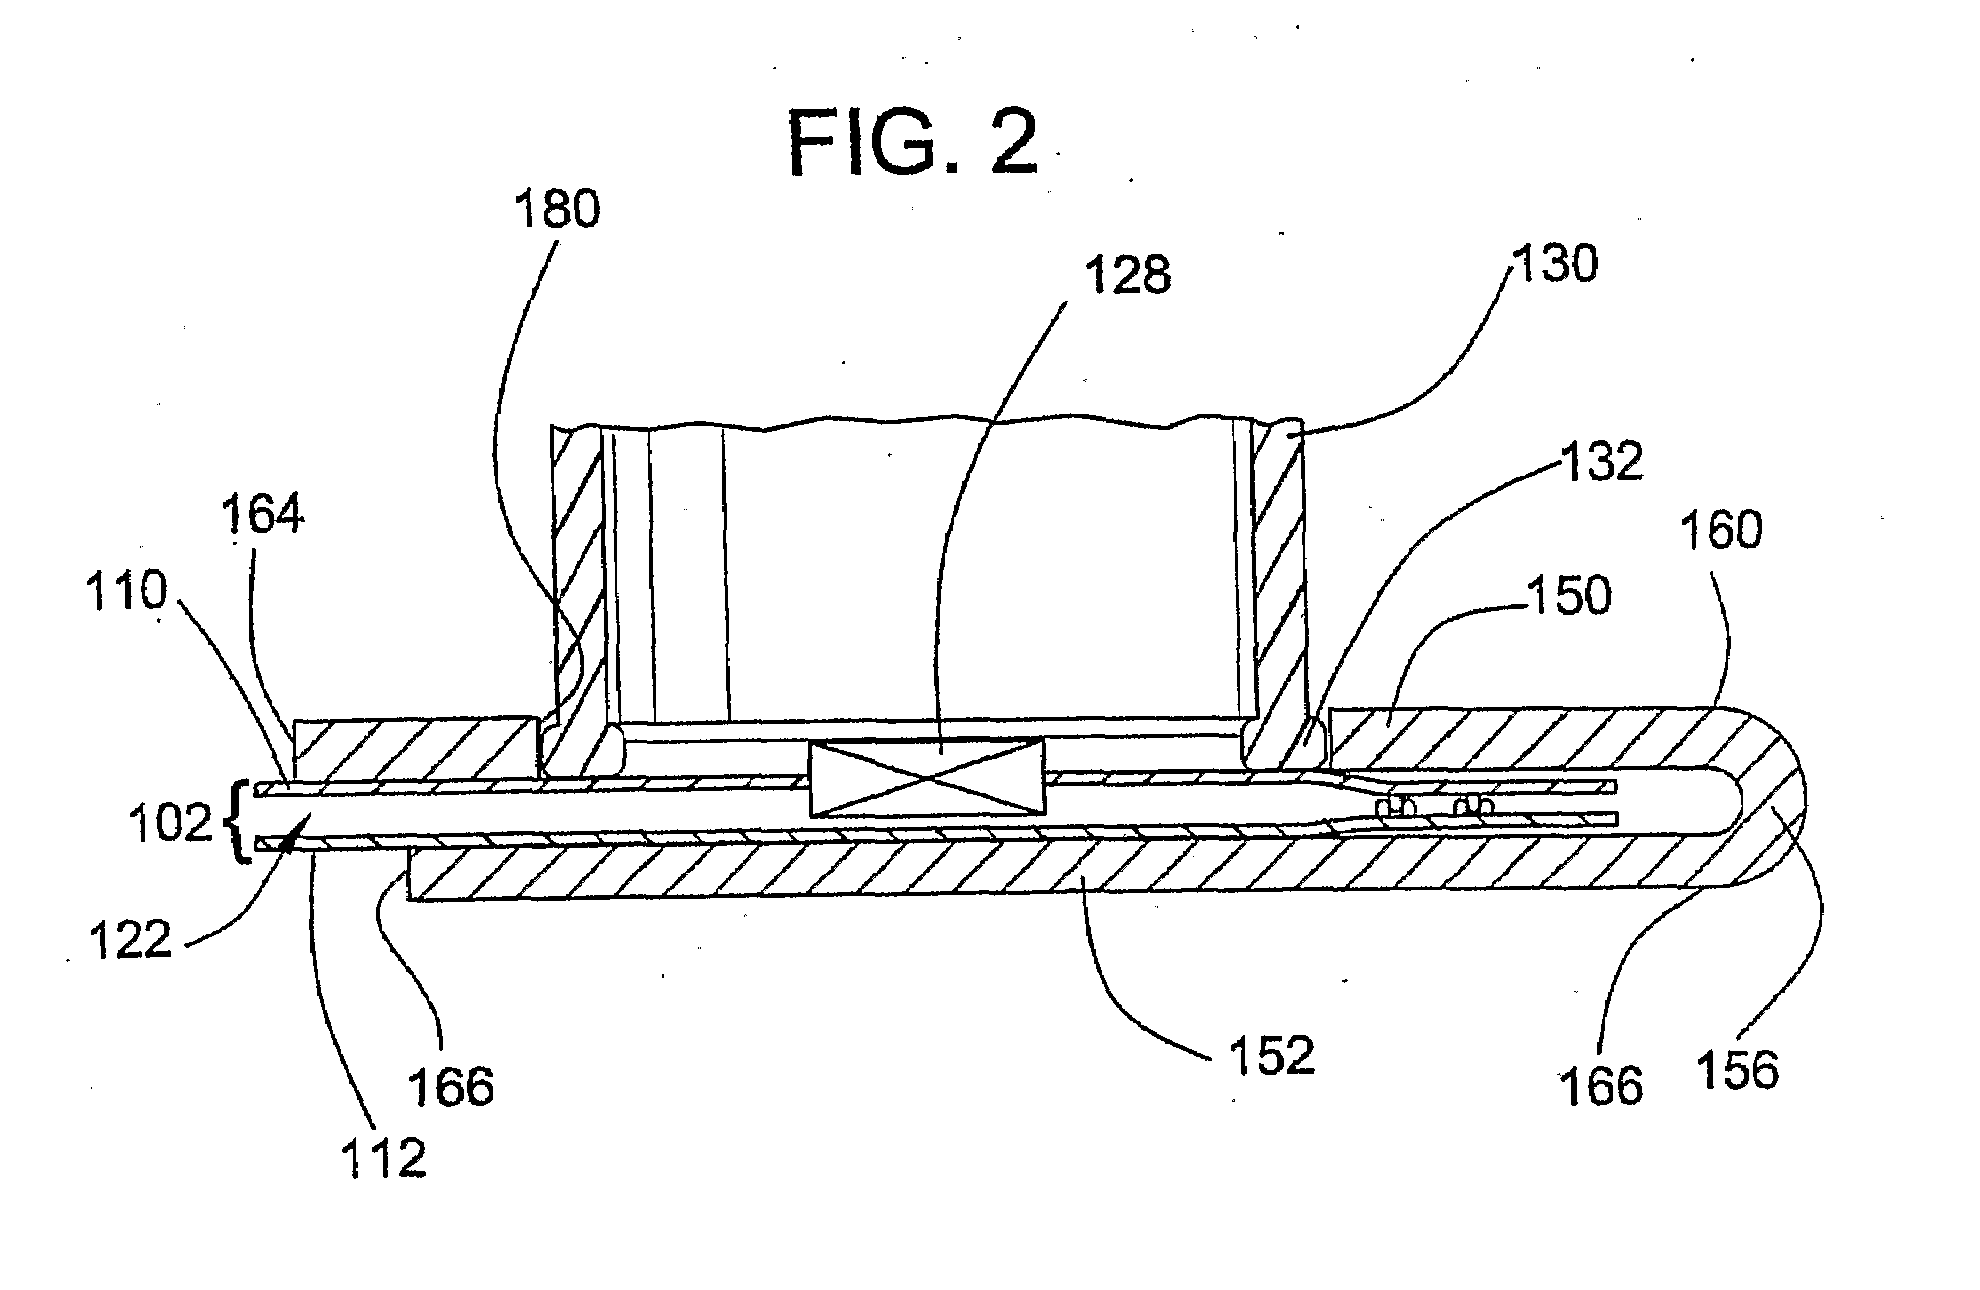 Device and Method for Evacuating a Storage Bag